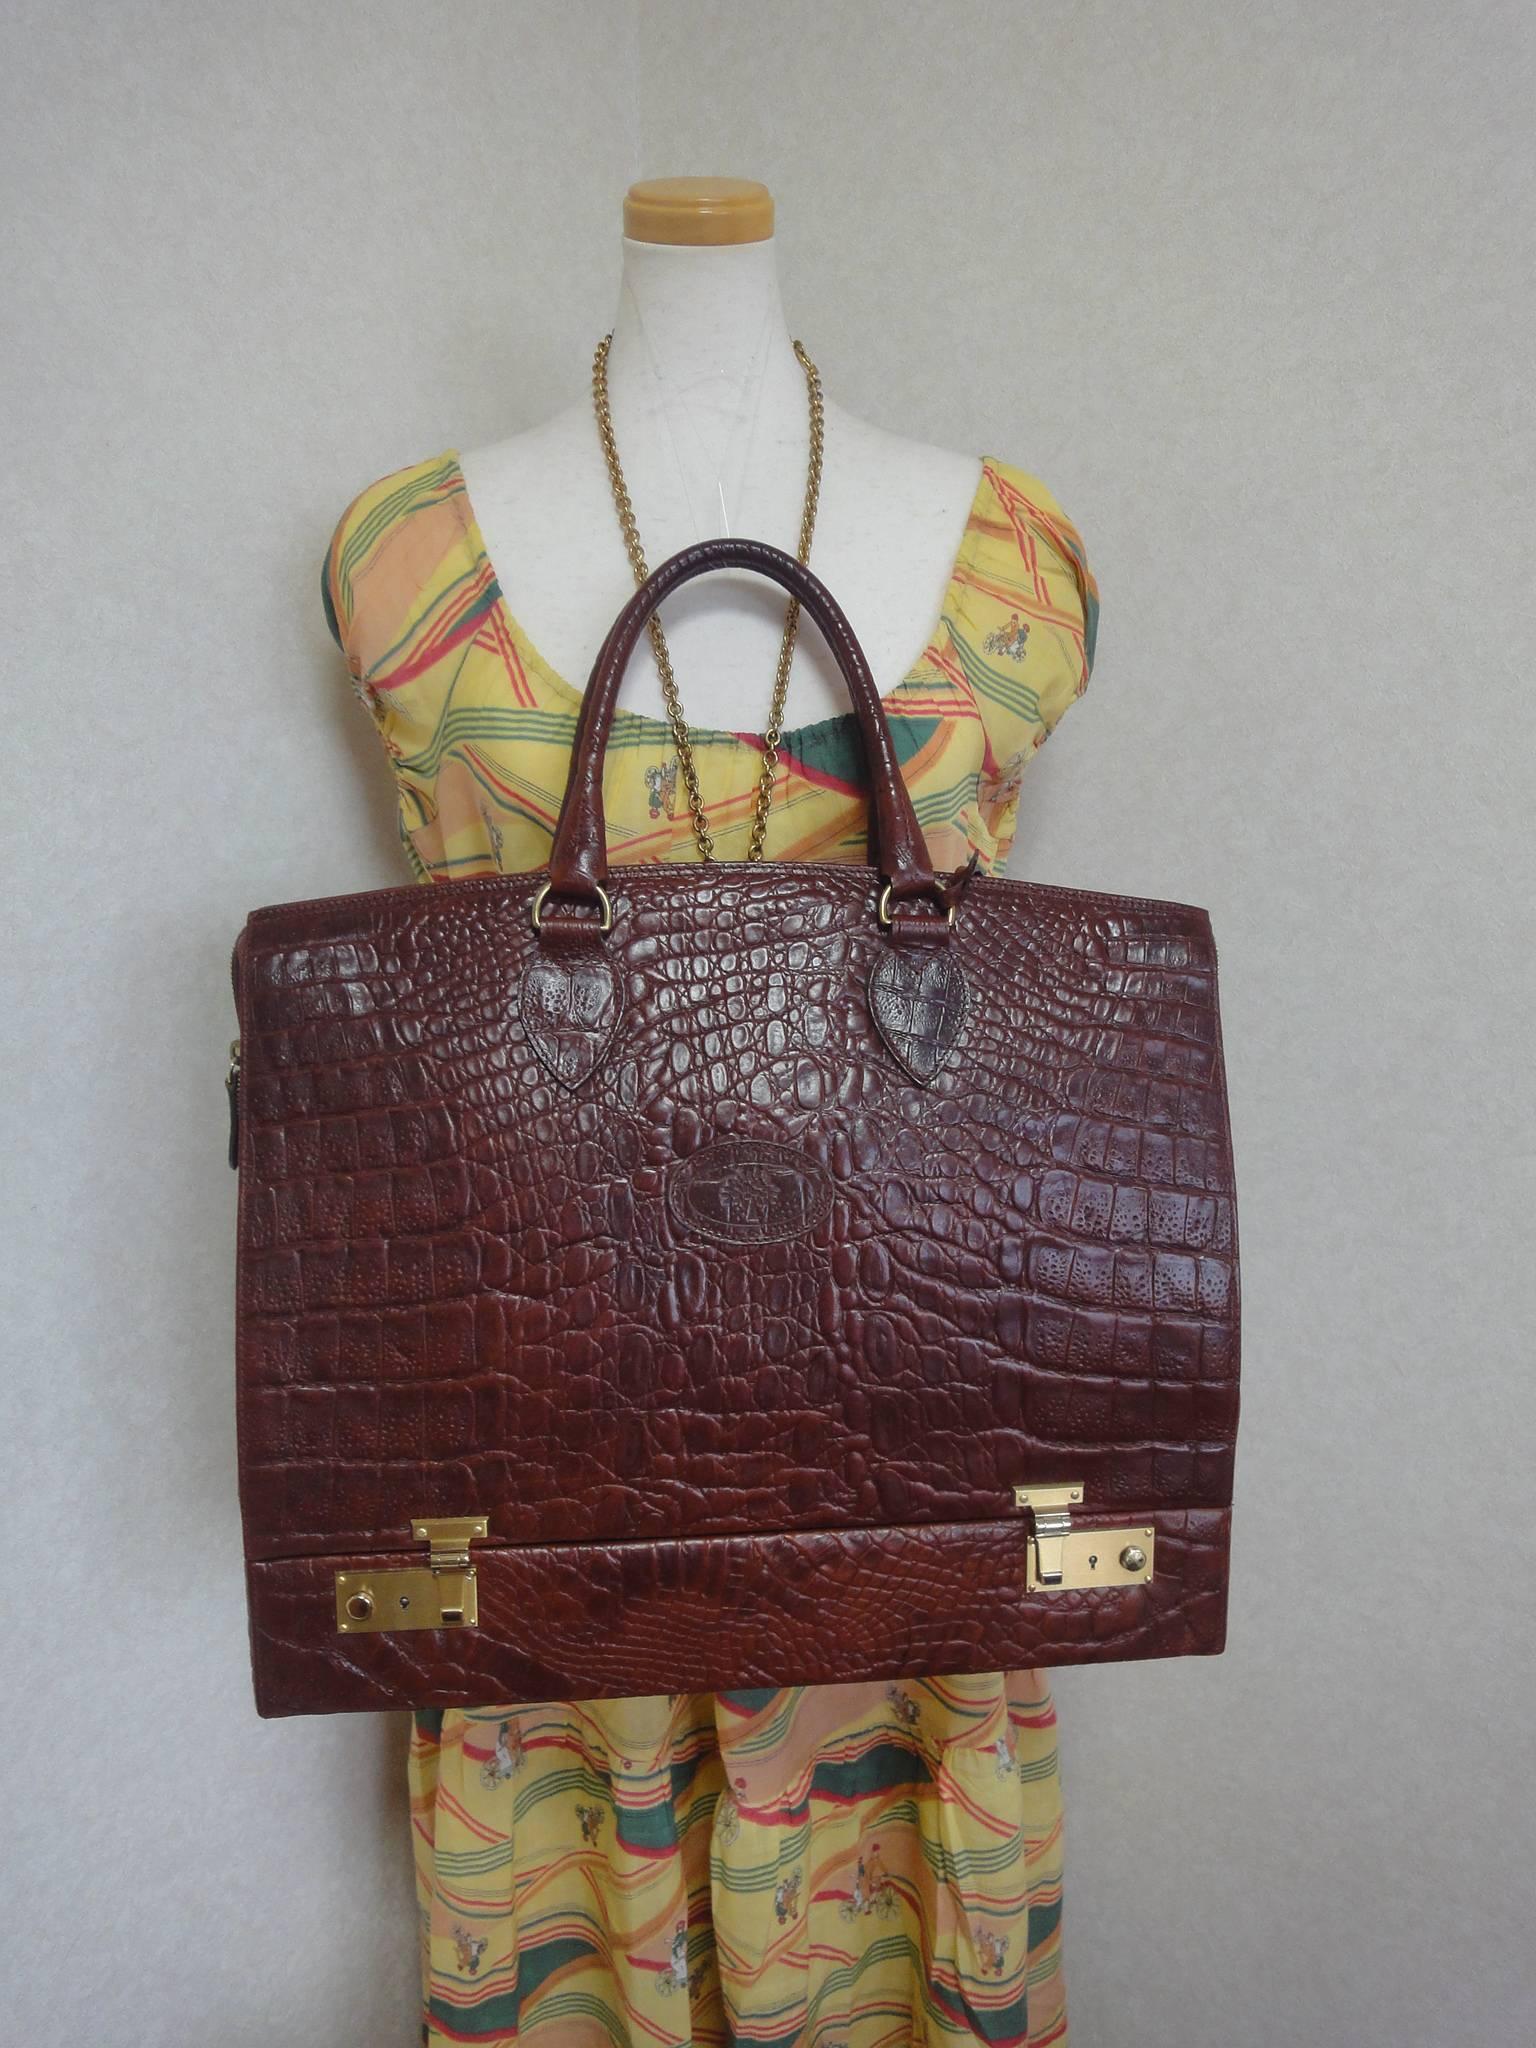 1990s. MINT. Vintage Mulberry croc embossed leather birkin doctor's bag style travel bag with built-in jewelry case. Unisex. Special custom order

MINT! Vintage Mulberry croc embossed leather birkin style, large Doctor's bag style travel bag with